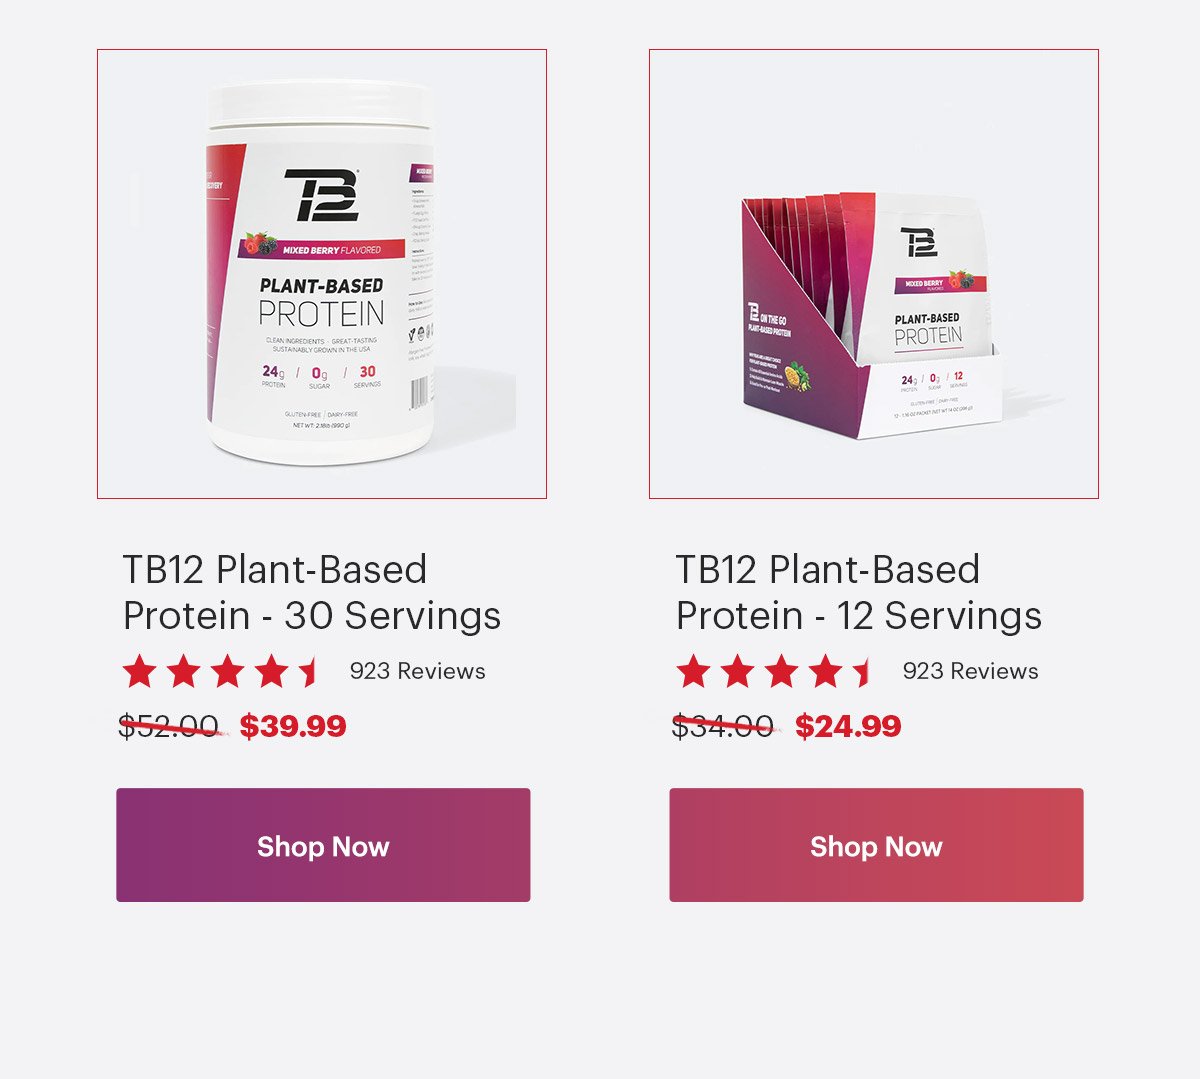 TB12 Plant-Based Protein - Mixed Berry